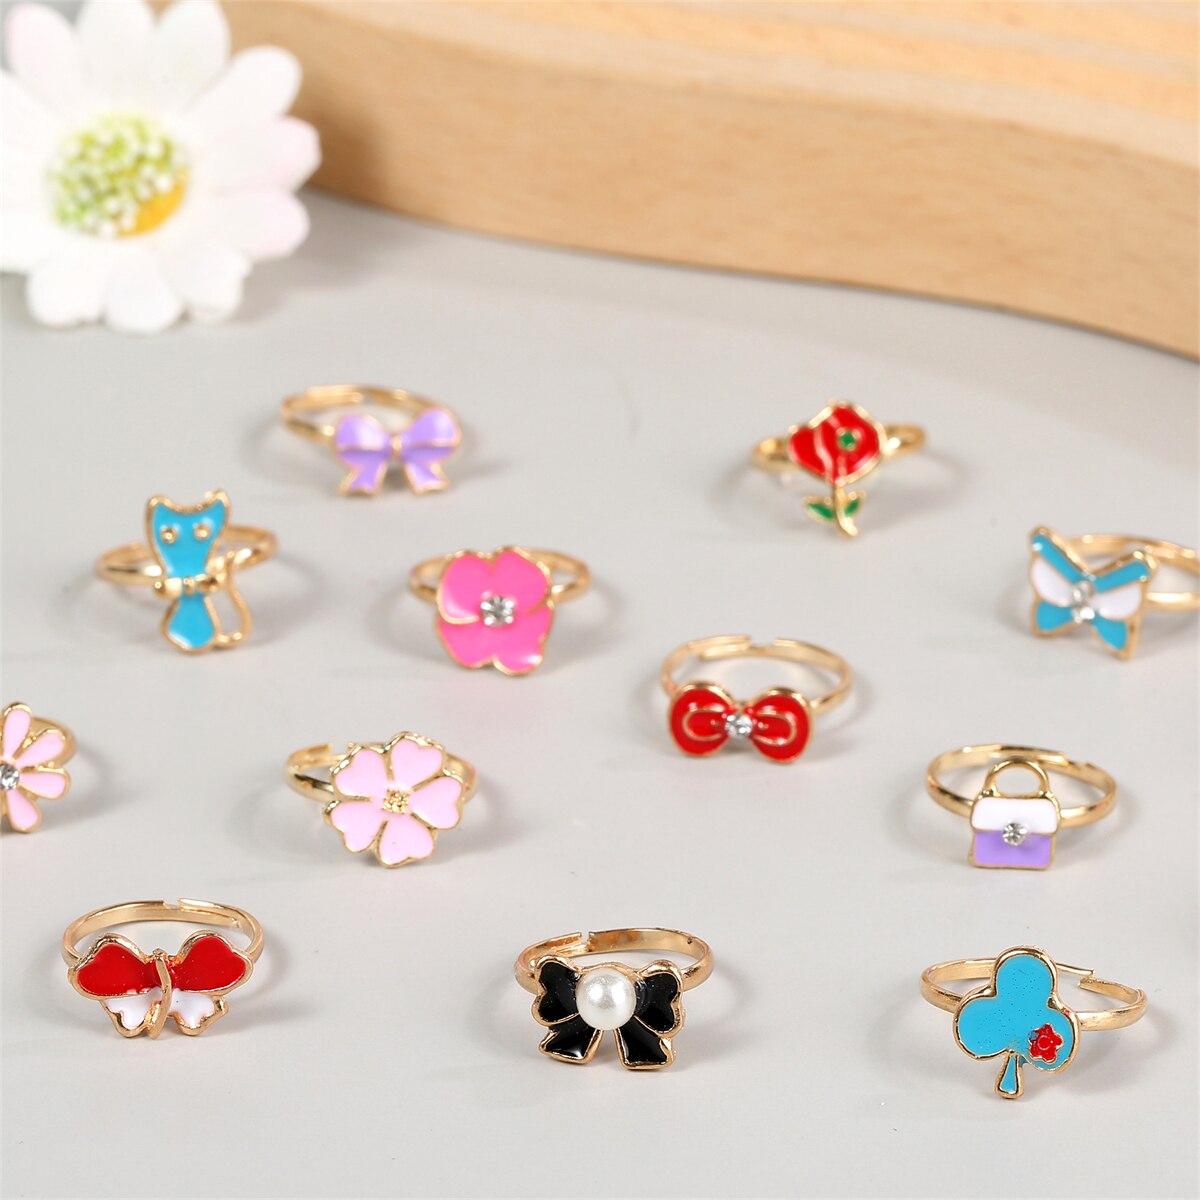 36 PCS/set Adjustable Kids Rings Jewelry Butterfly Rabbit Animal Crystal Open Finger Ring for Children Girls Birthday Party Gift